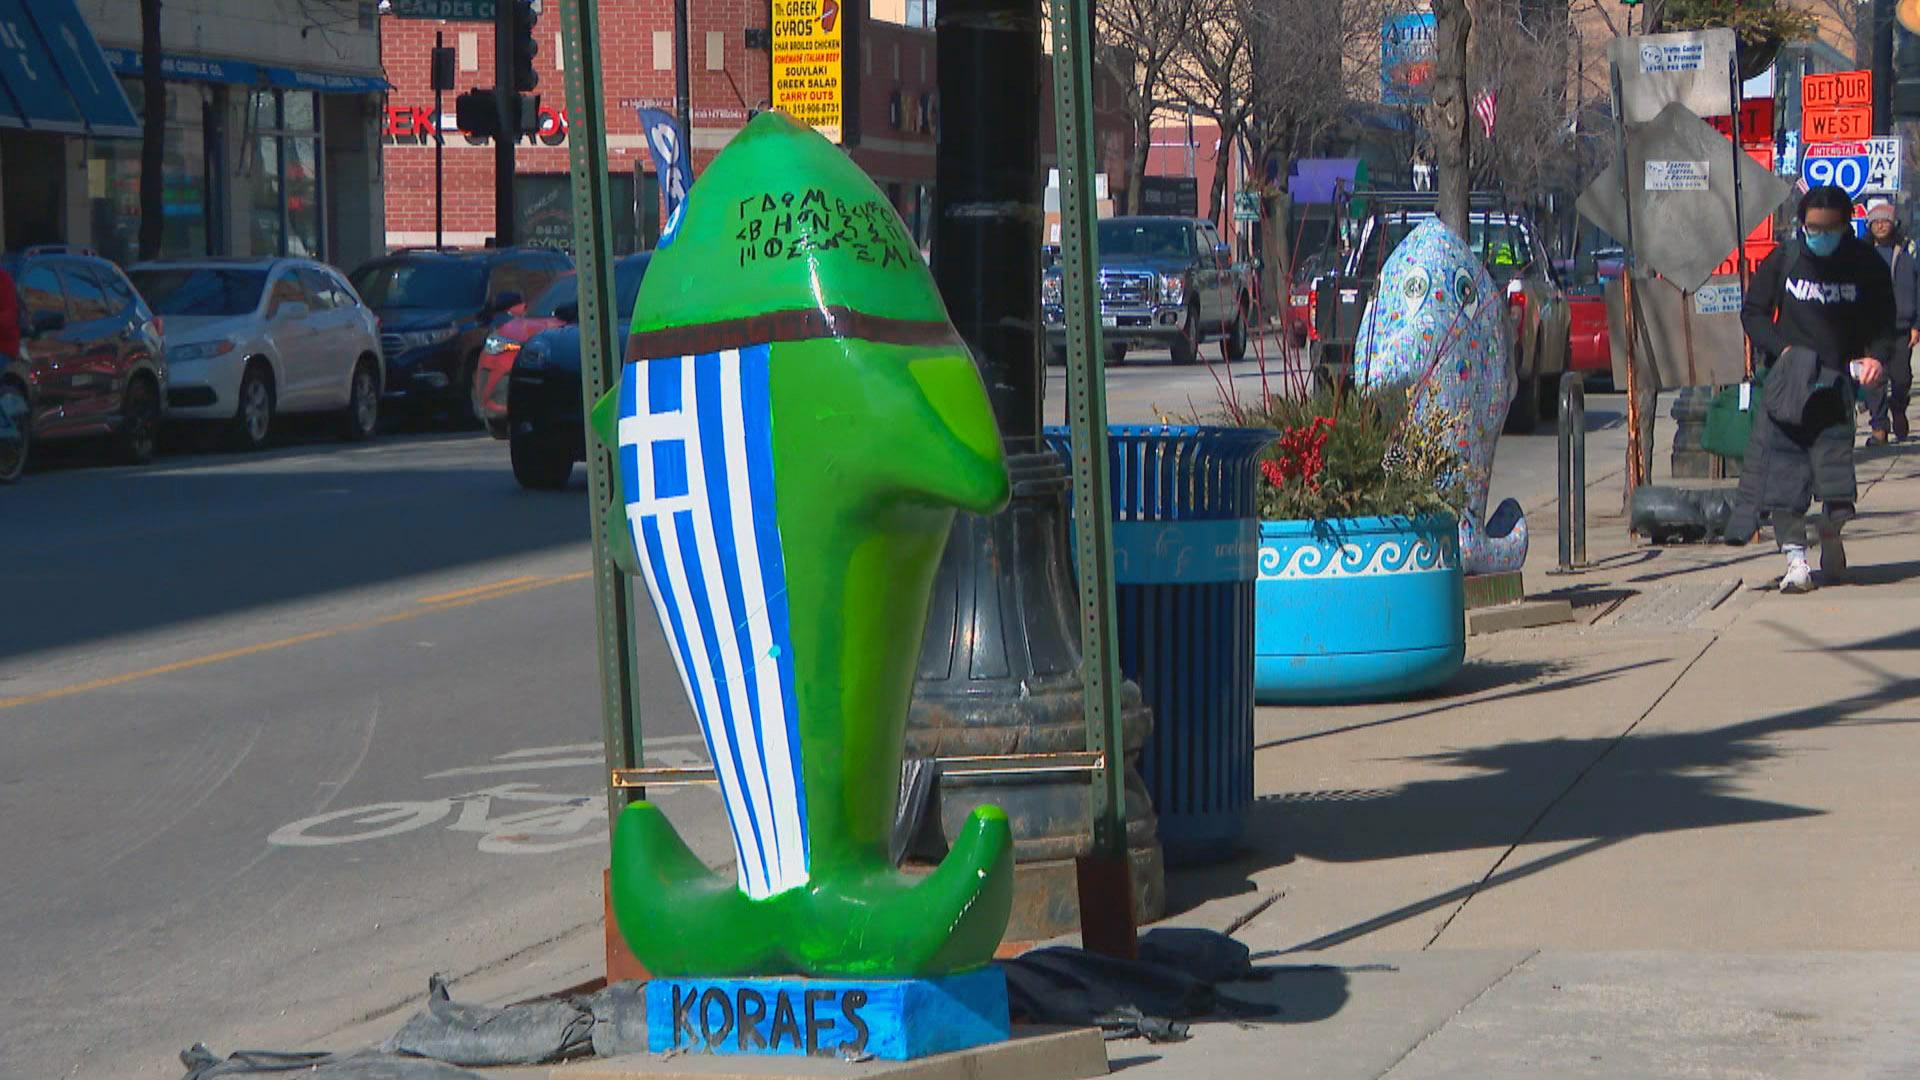 A scene from the “Fanciful Fish” outdoor exhibit along Halsted Street in Greektown. (WTTW News)